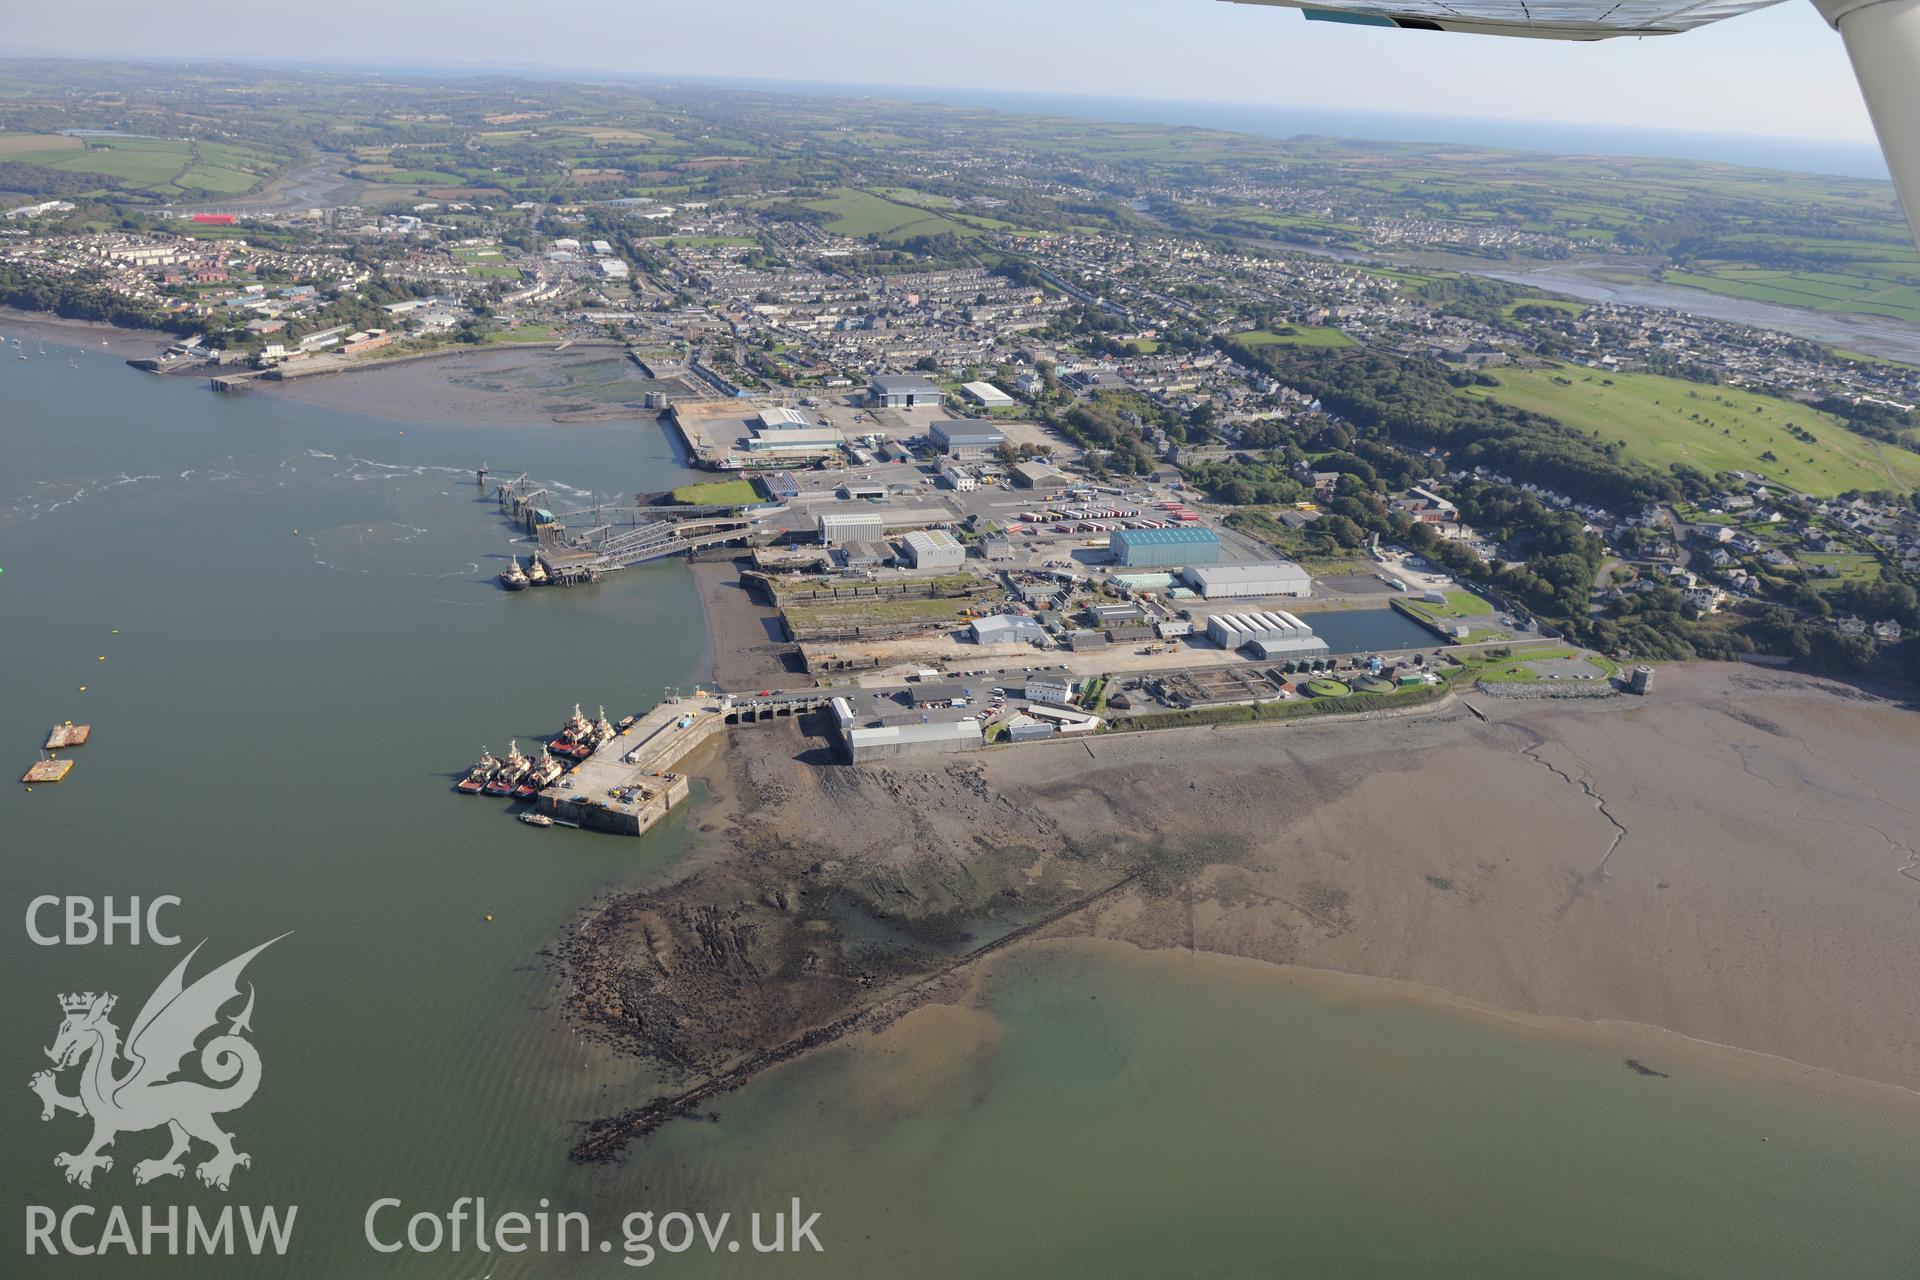 The town of Pembroke Dock, including views of the dock, ferry terminal and dry dock. Oblique aerial photograph taken during the Royal Commission's programme of archaeological aerial reconnaissance by Toby Driver on 30th September 2015.